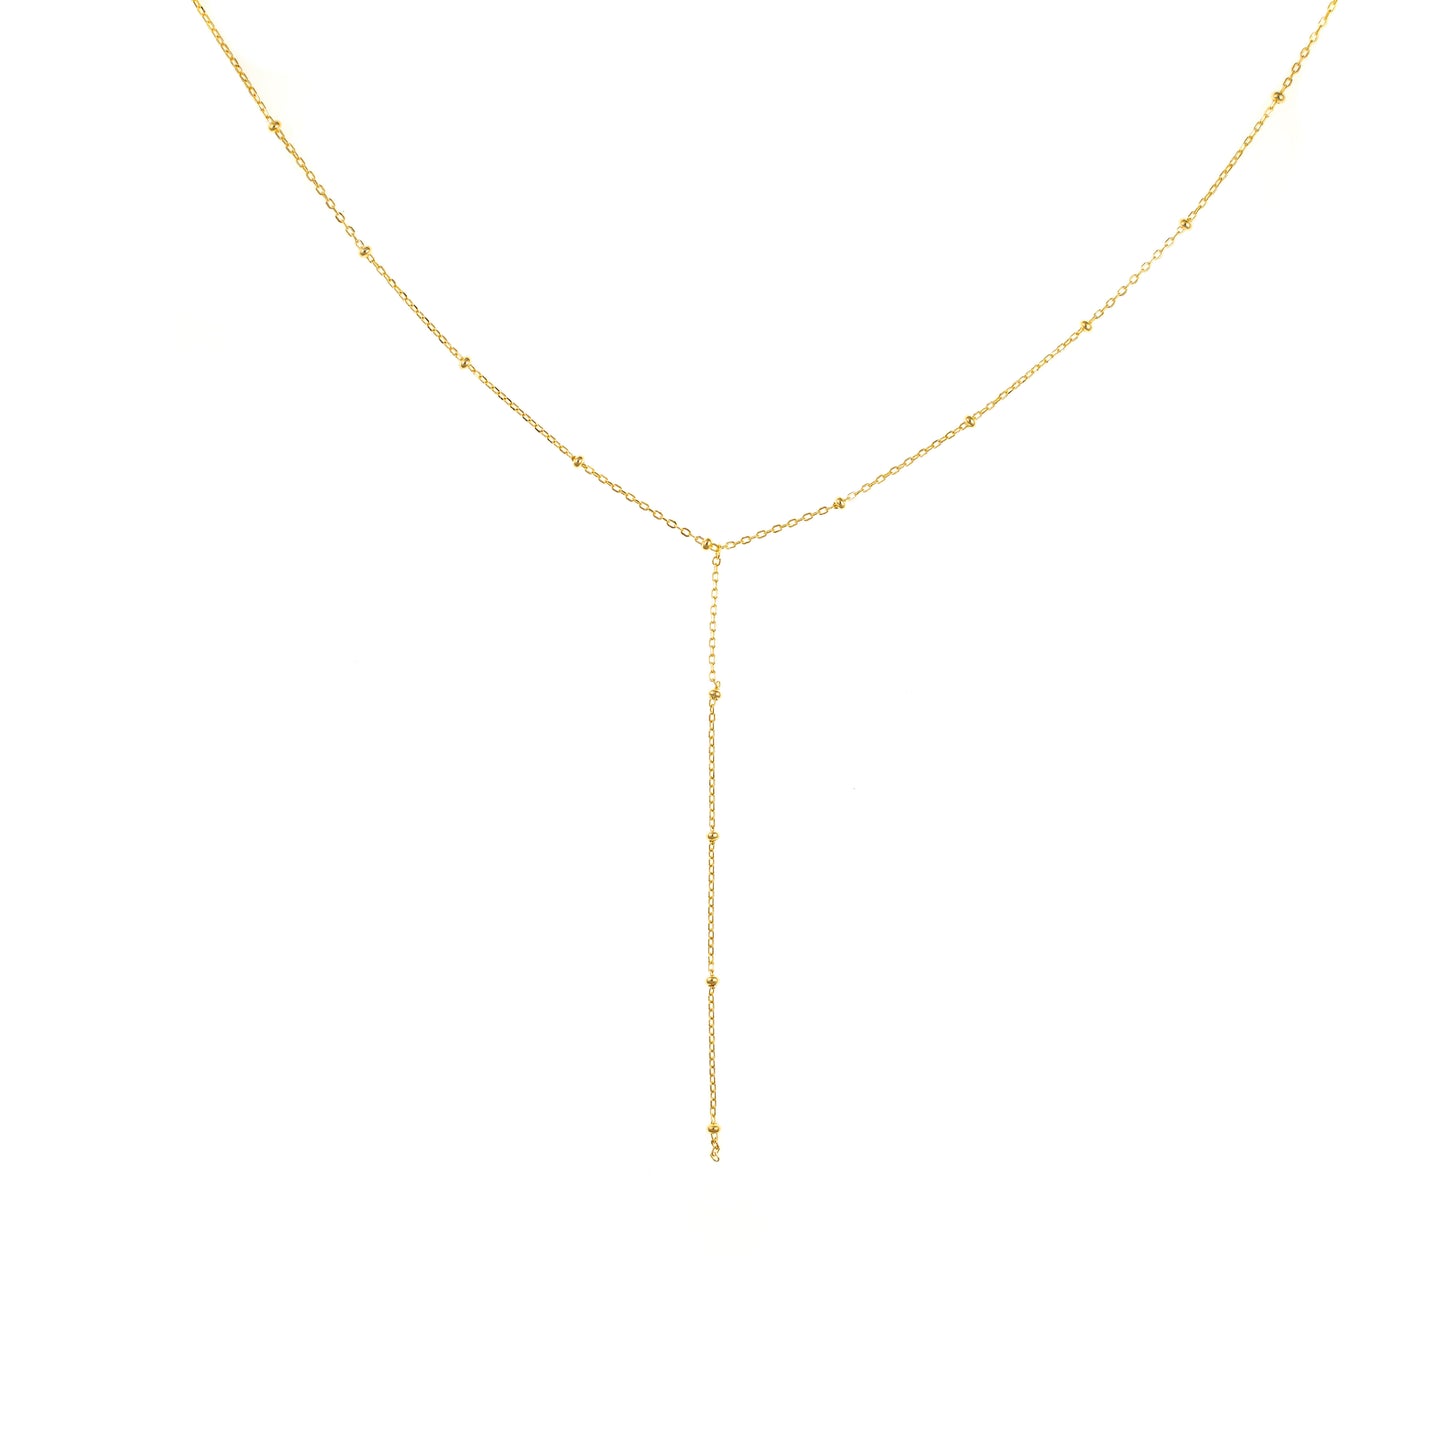 Sterling silver gold plated necklace "Amanda"